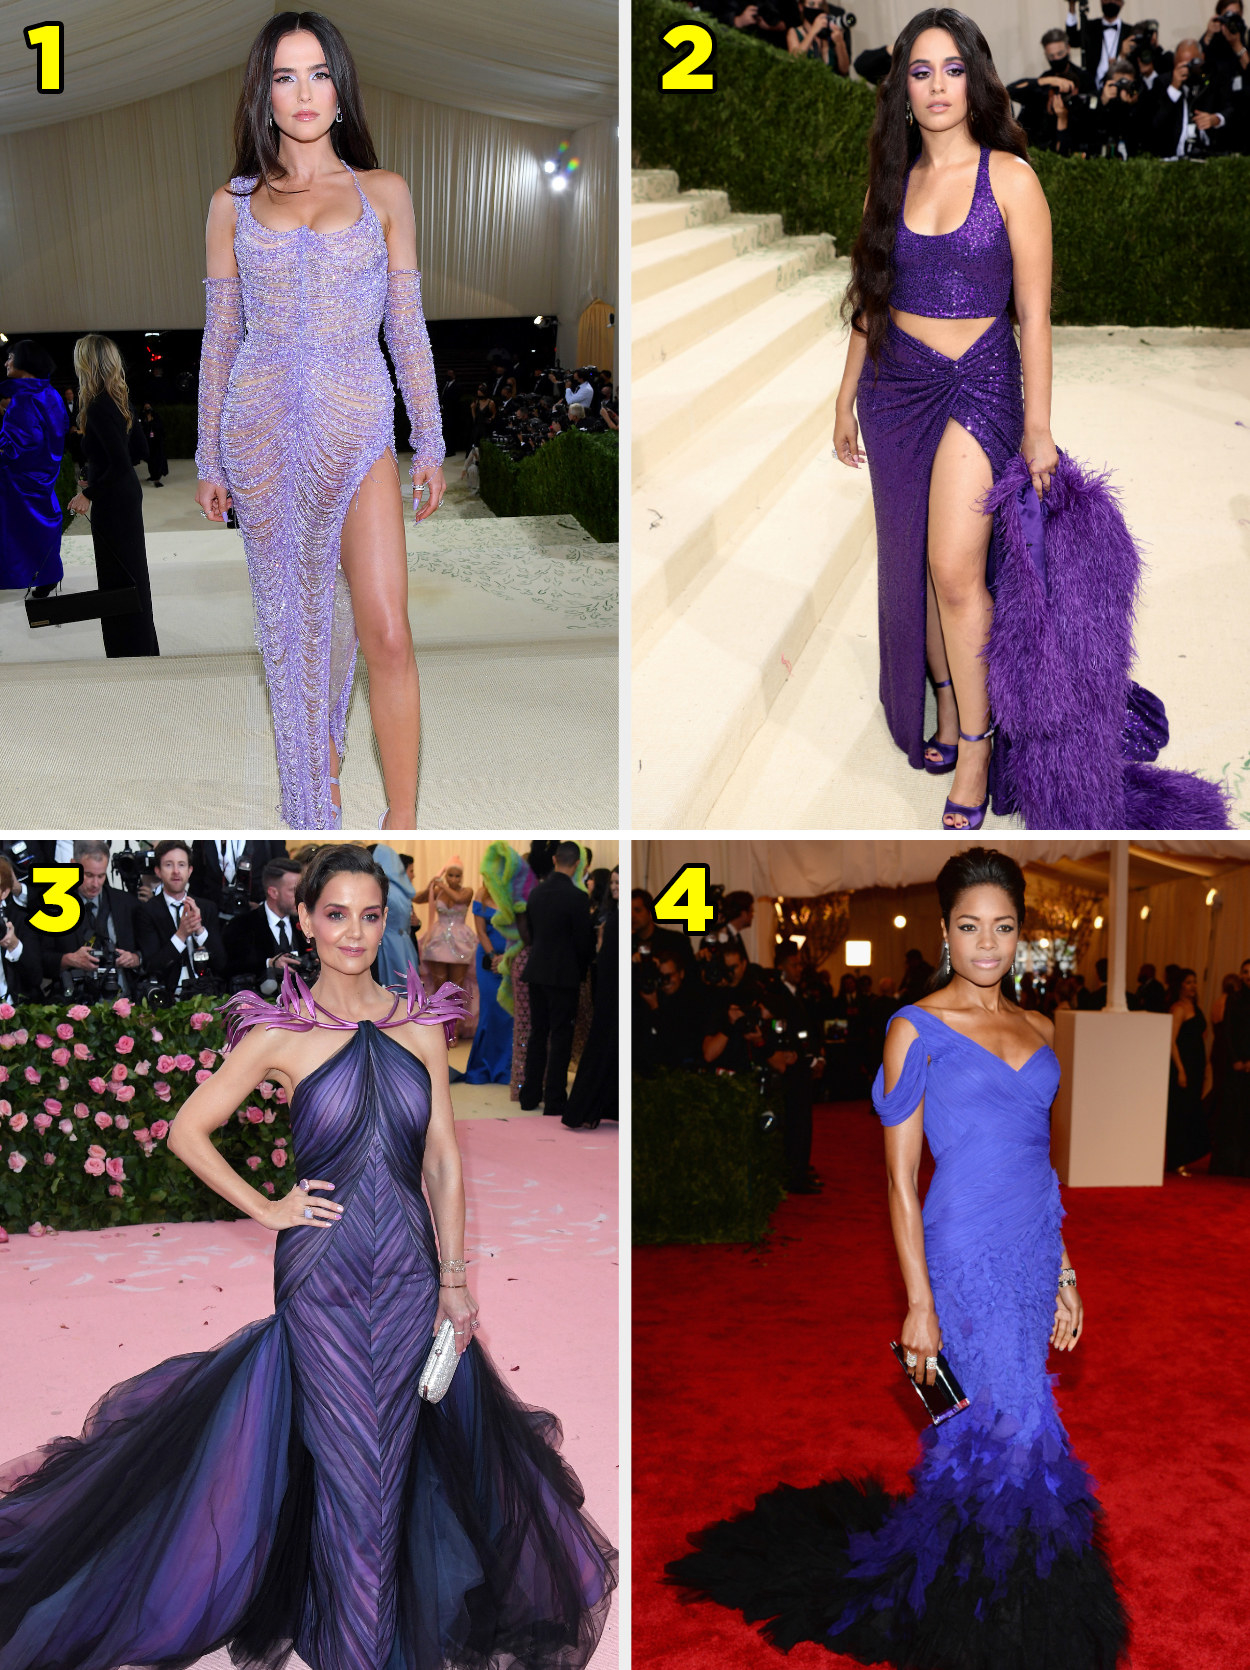 1. A see through gown with a thigh slit made of jewels. 2. A two piece gown with a thigh slit and a feather boa. 3. A halter neck gown with ruching and feathers coming from the neck. 4. A one shoulder gown with feathers on the skirt